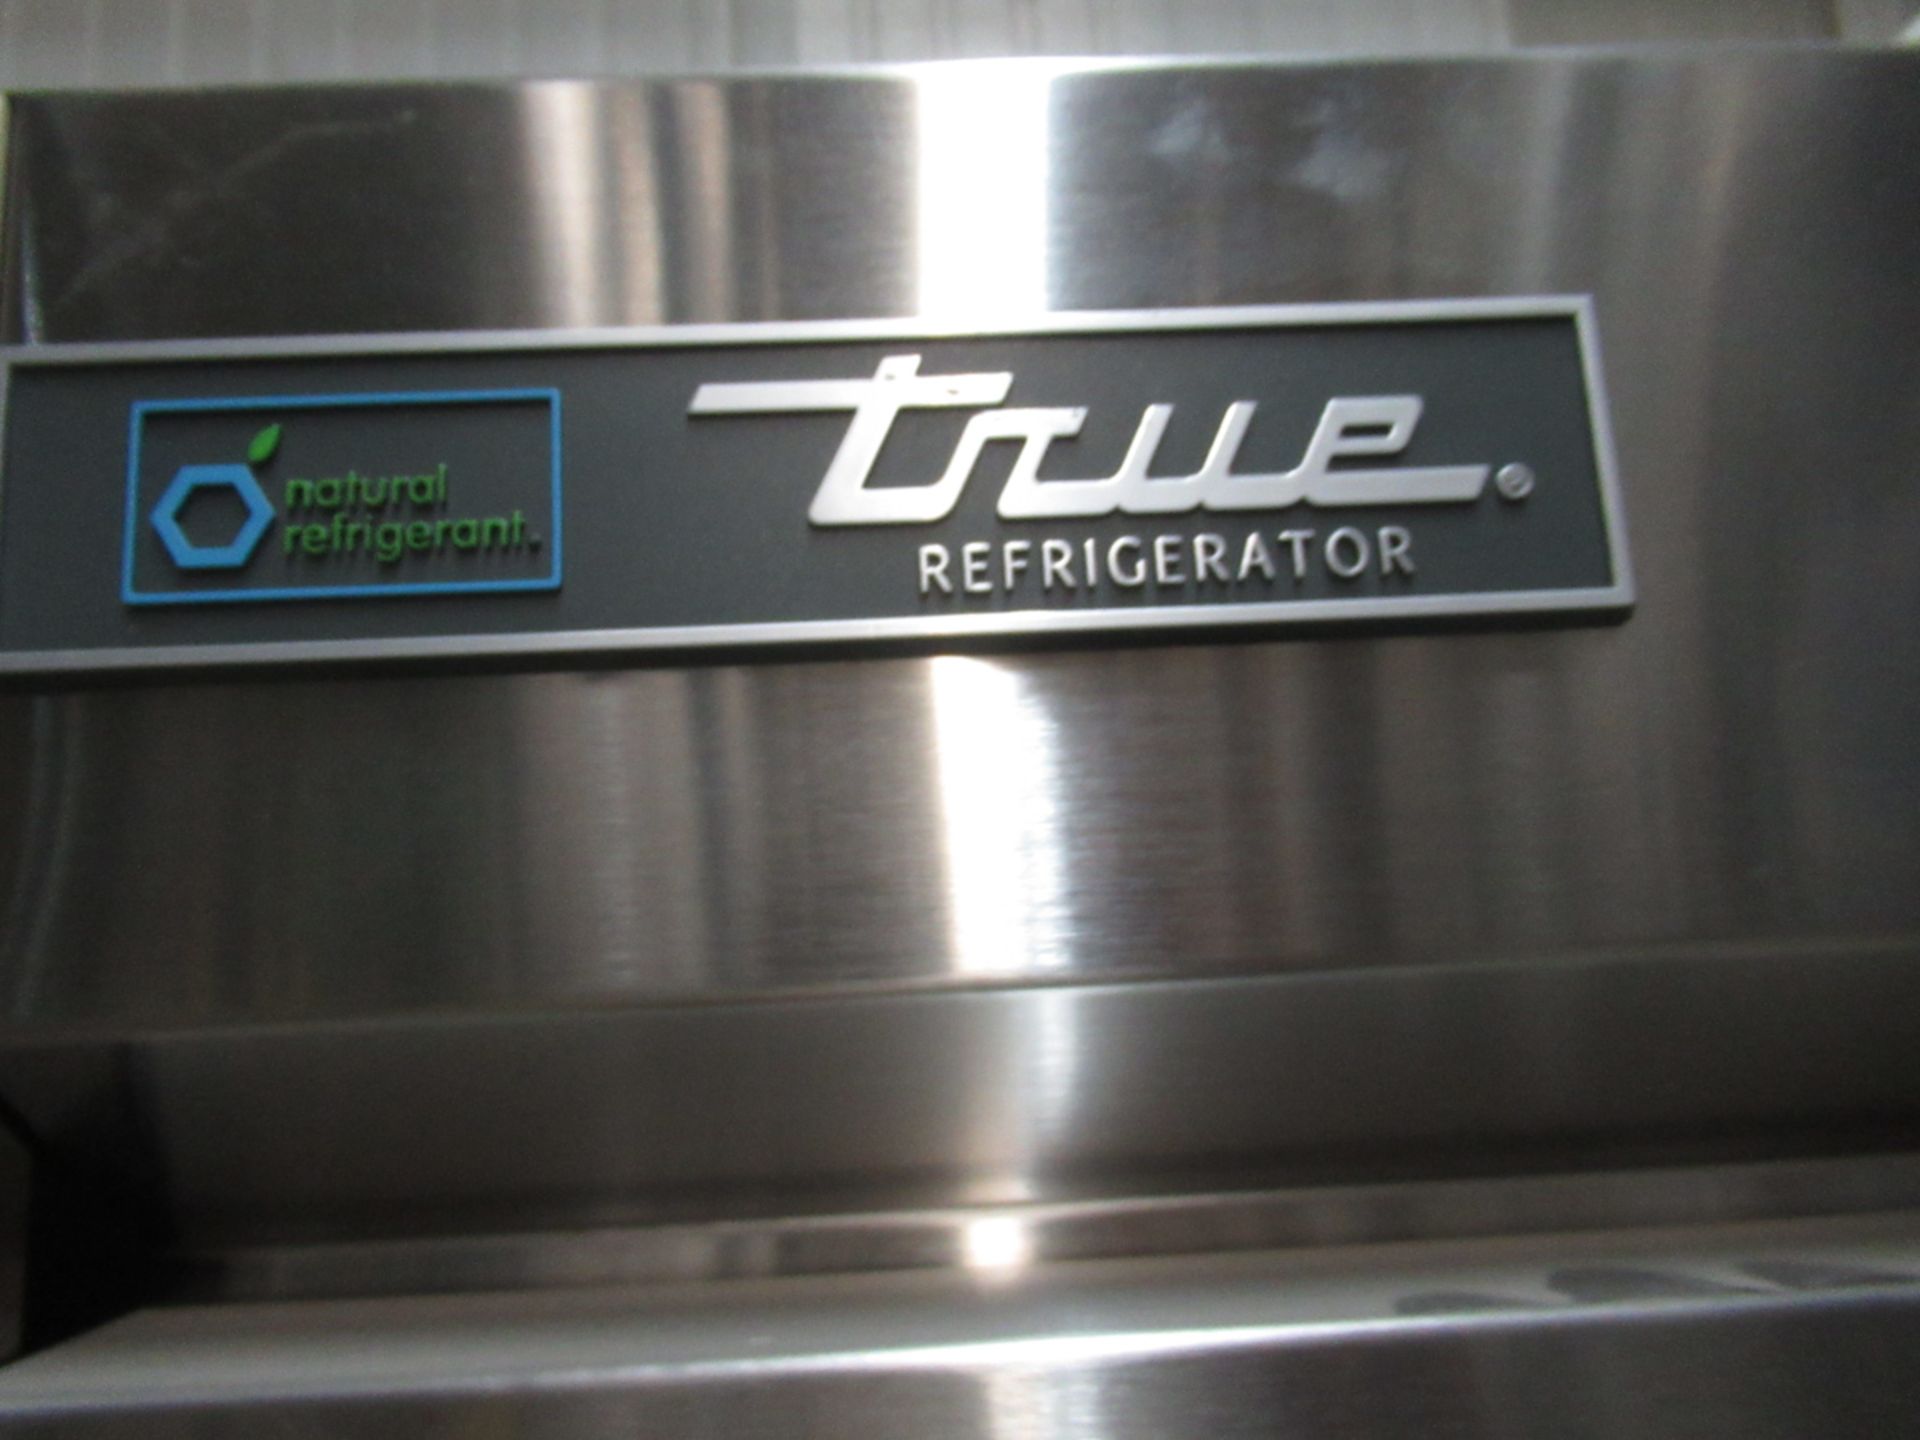 TRUE T-72-HC 78 1/10" THREE SECTION REACH IN REFRIGERATOR, S/N: 10069126 - Image 3 of 3